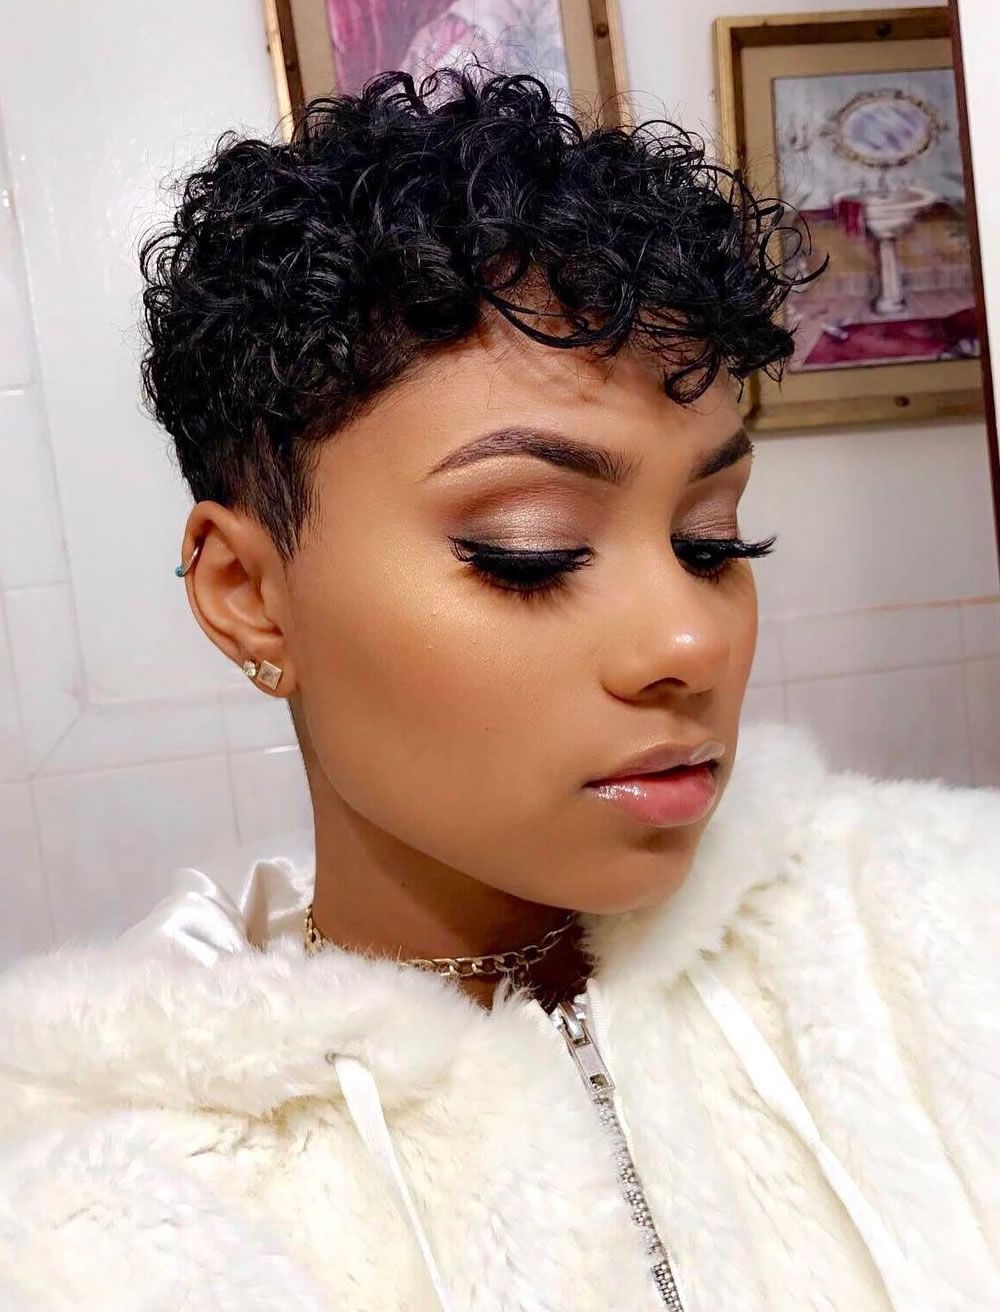 Curly Natural Short Hair Hairstyles For Black Women – Hairstyles For Natural Short Haircuts (View 12 of 25)